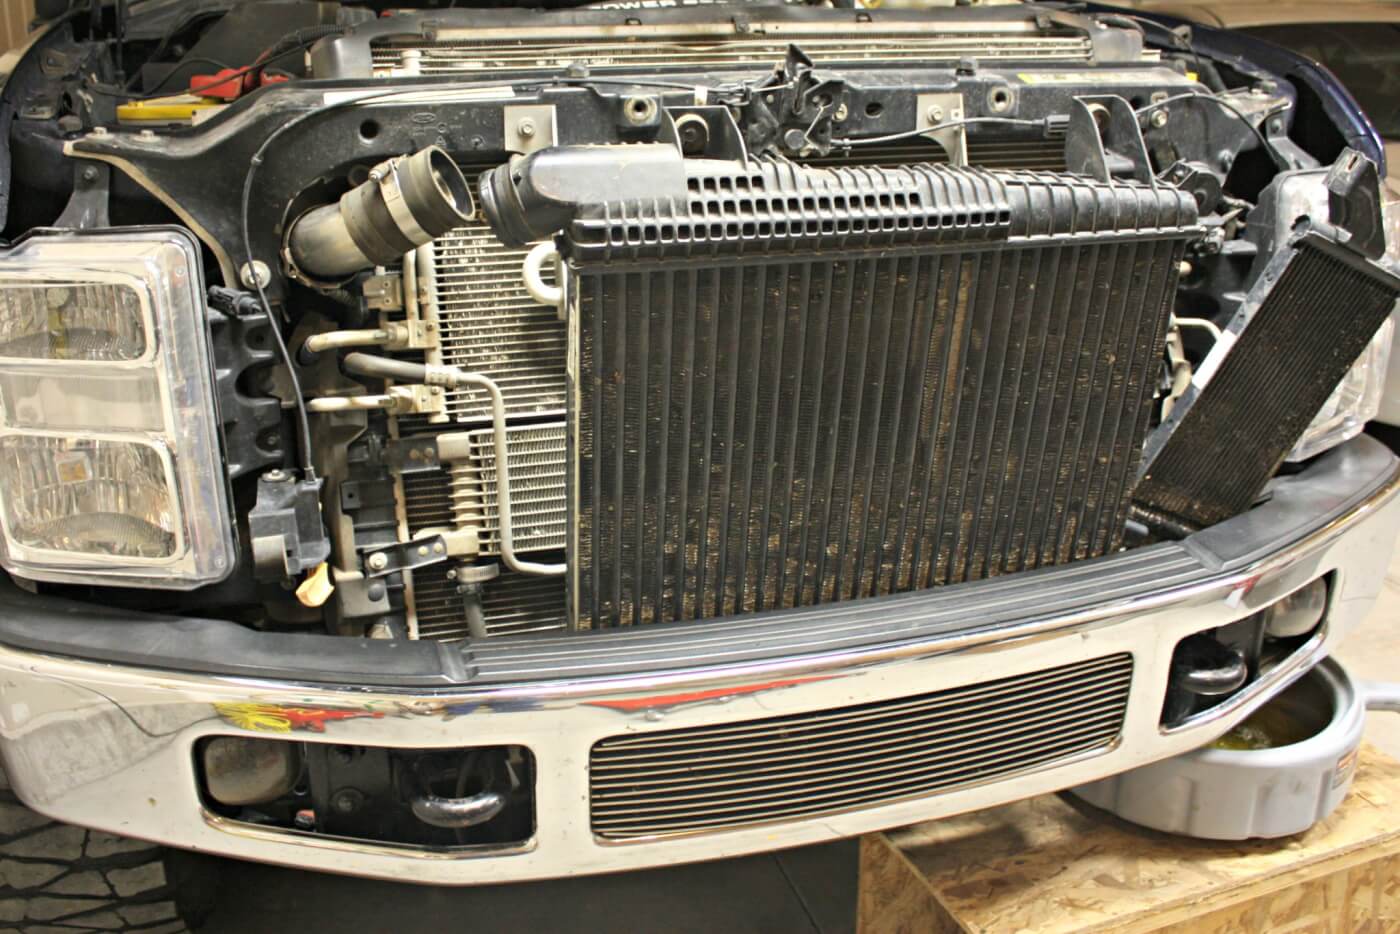 5. If there’s a cooler attached to the driver's side of the intercooler, remove it as well. The intercooler can be lifted straight up out of its lower supports. With the intercooler removed, the transmission cooler and A/C condenser can be moved aside.